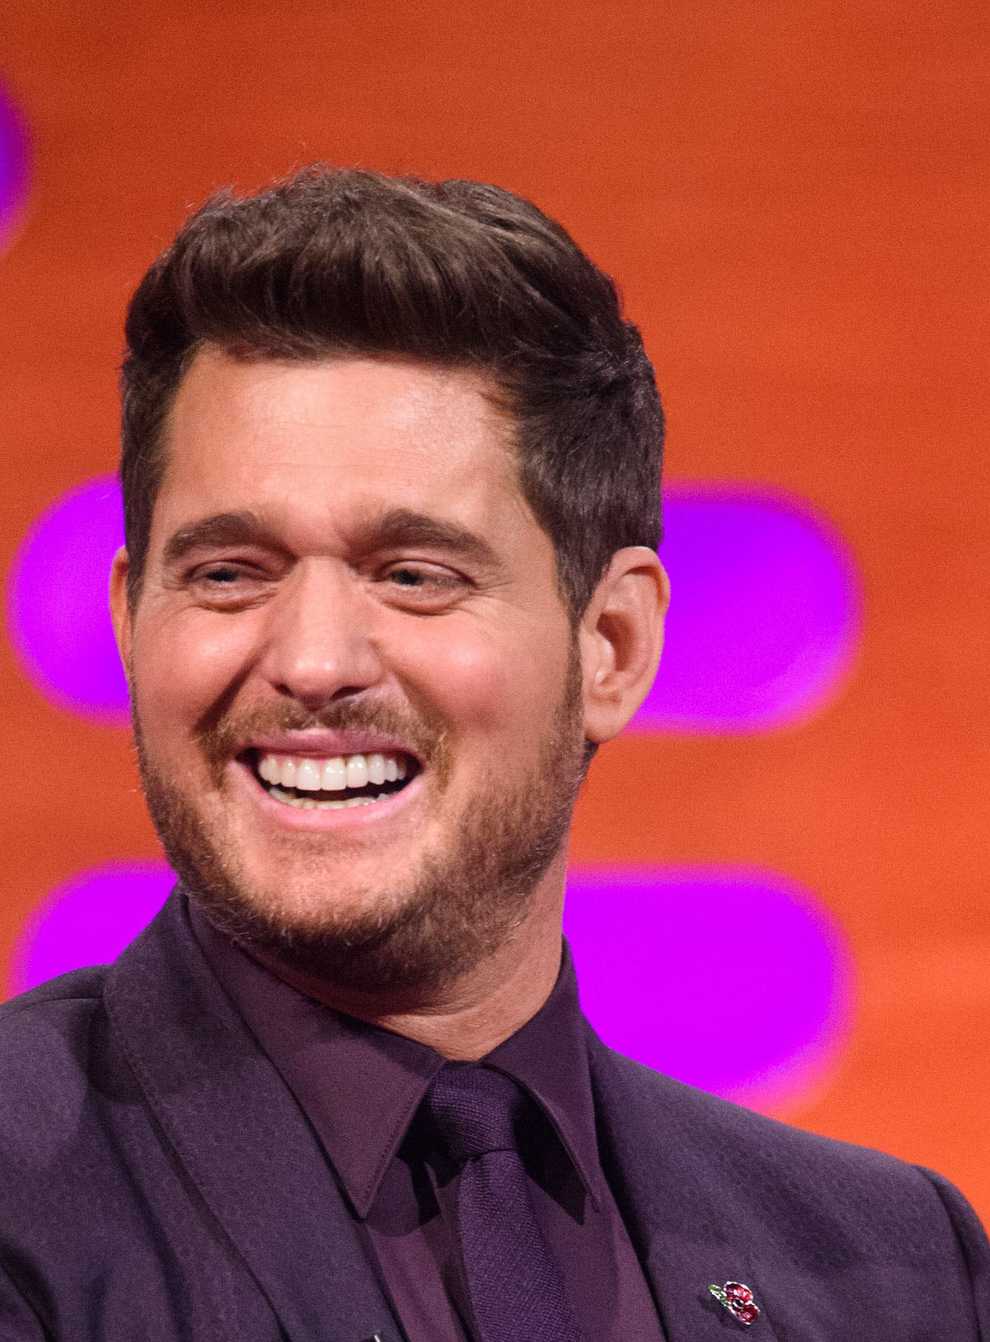 Michael Buble during the filming of the Graham Norton Show (PA)